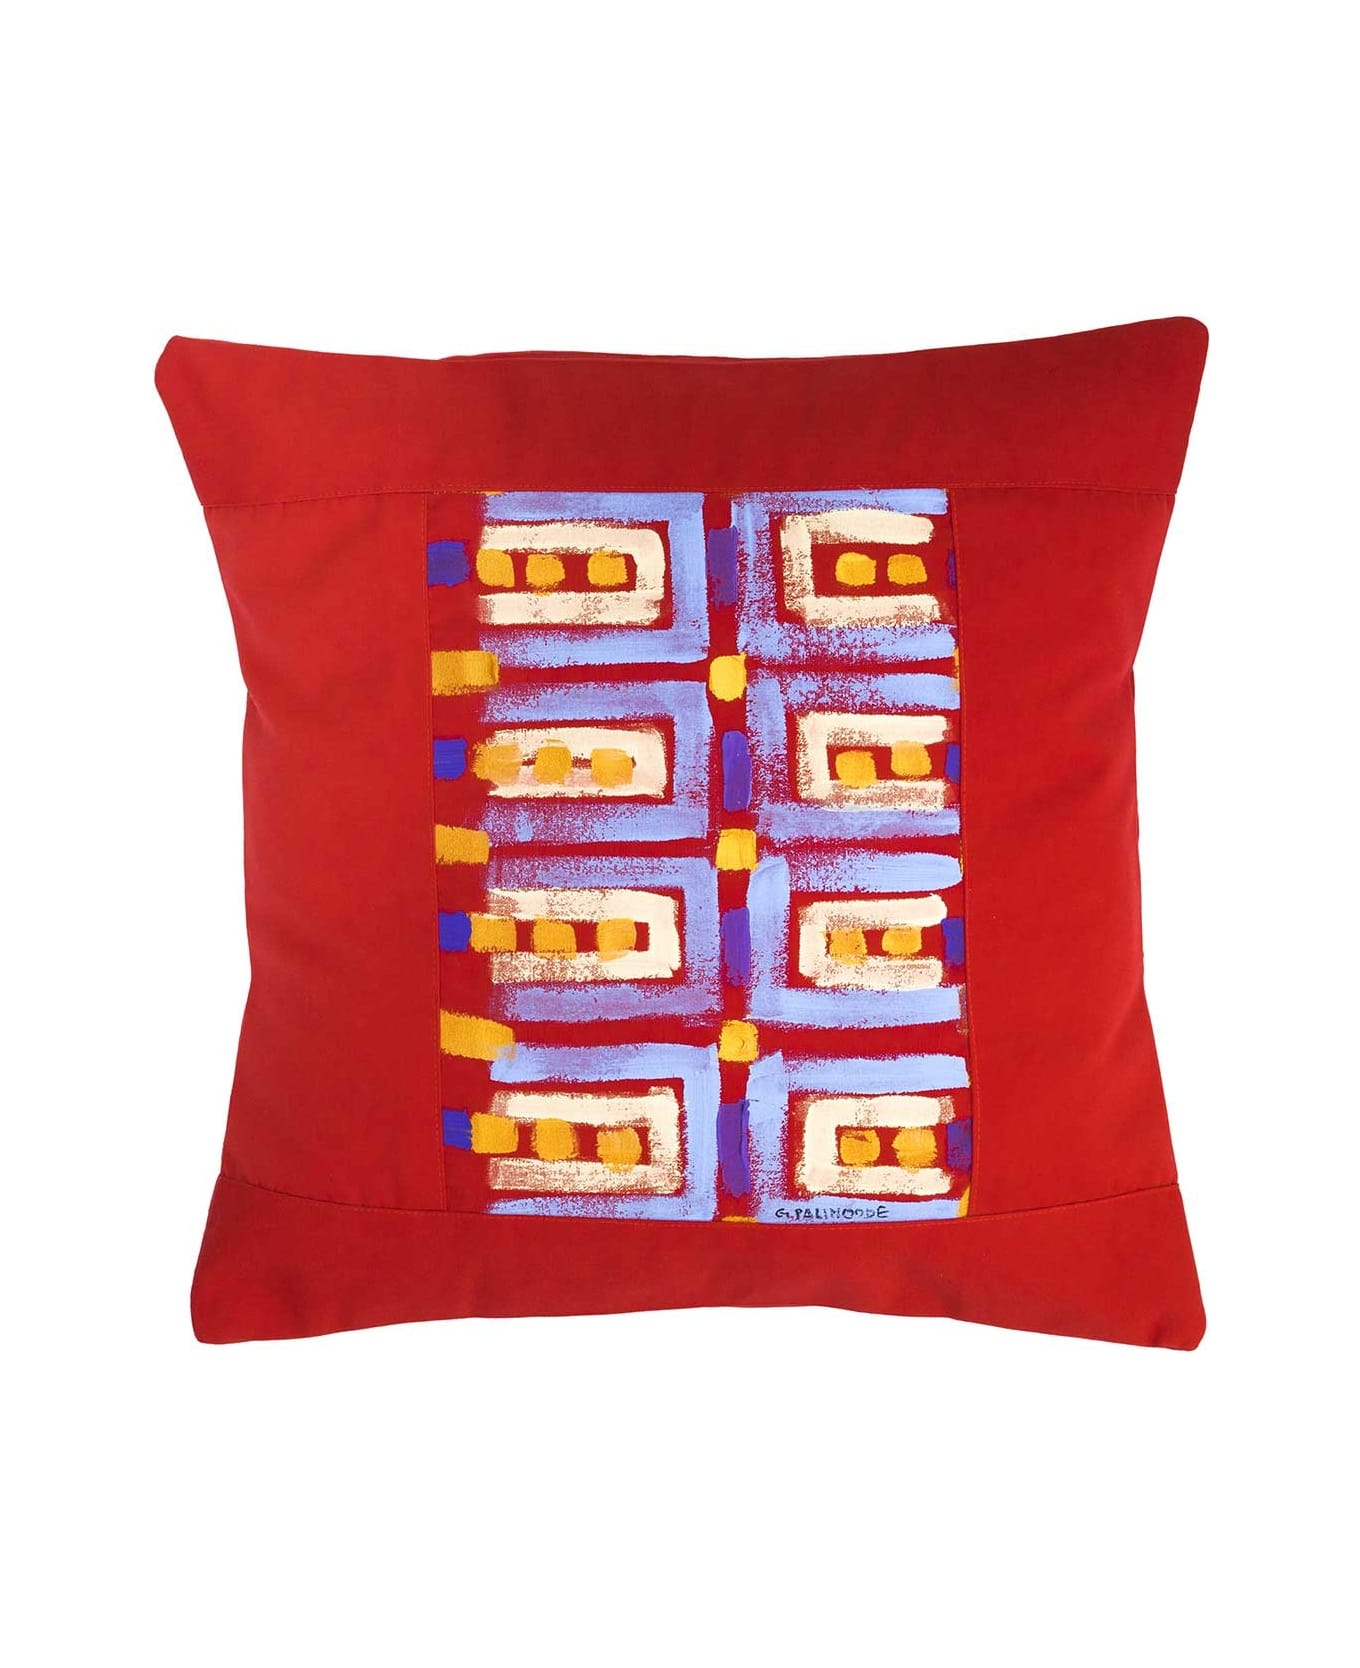 Le Botteghe su Gologone Cotton Hand Painted Indoor Cushion 70x70 cm - Red Fantasy クッション